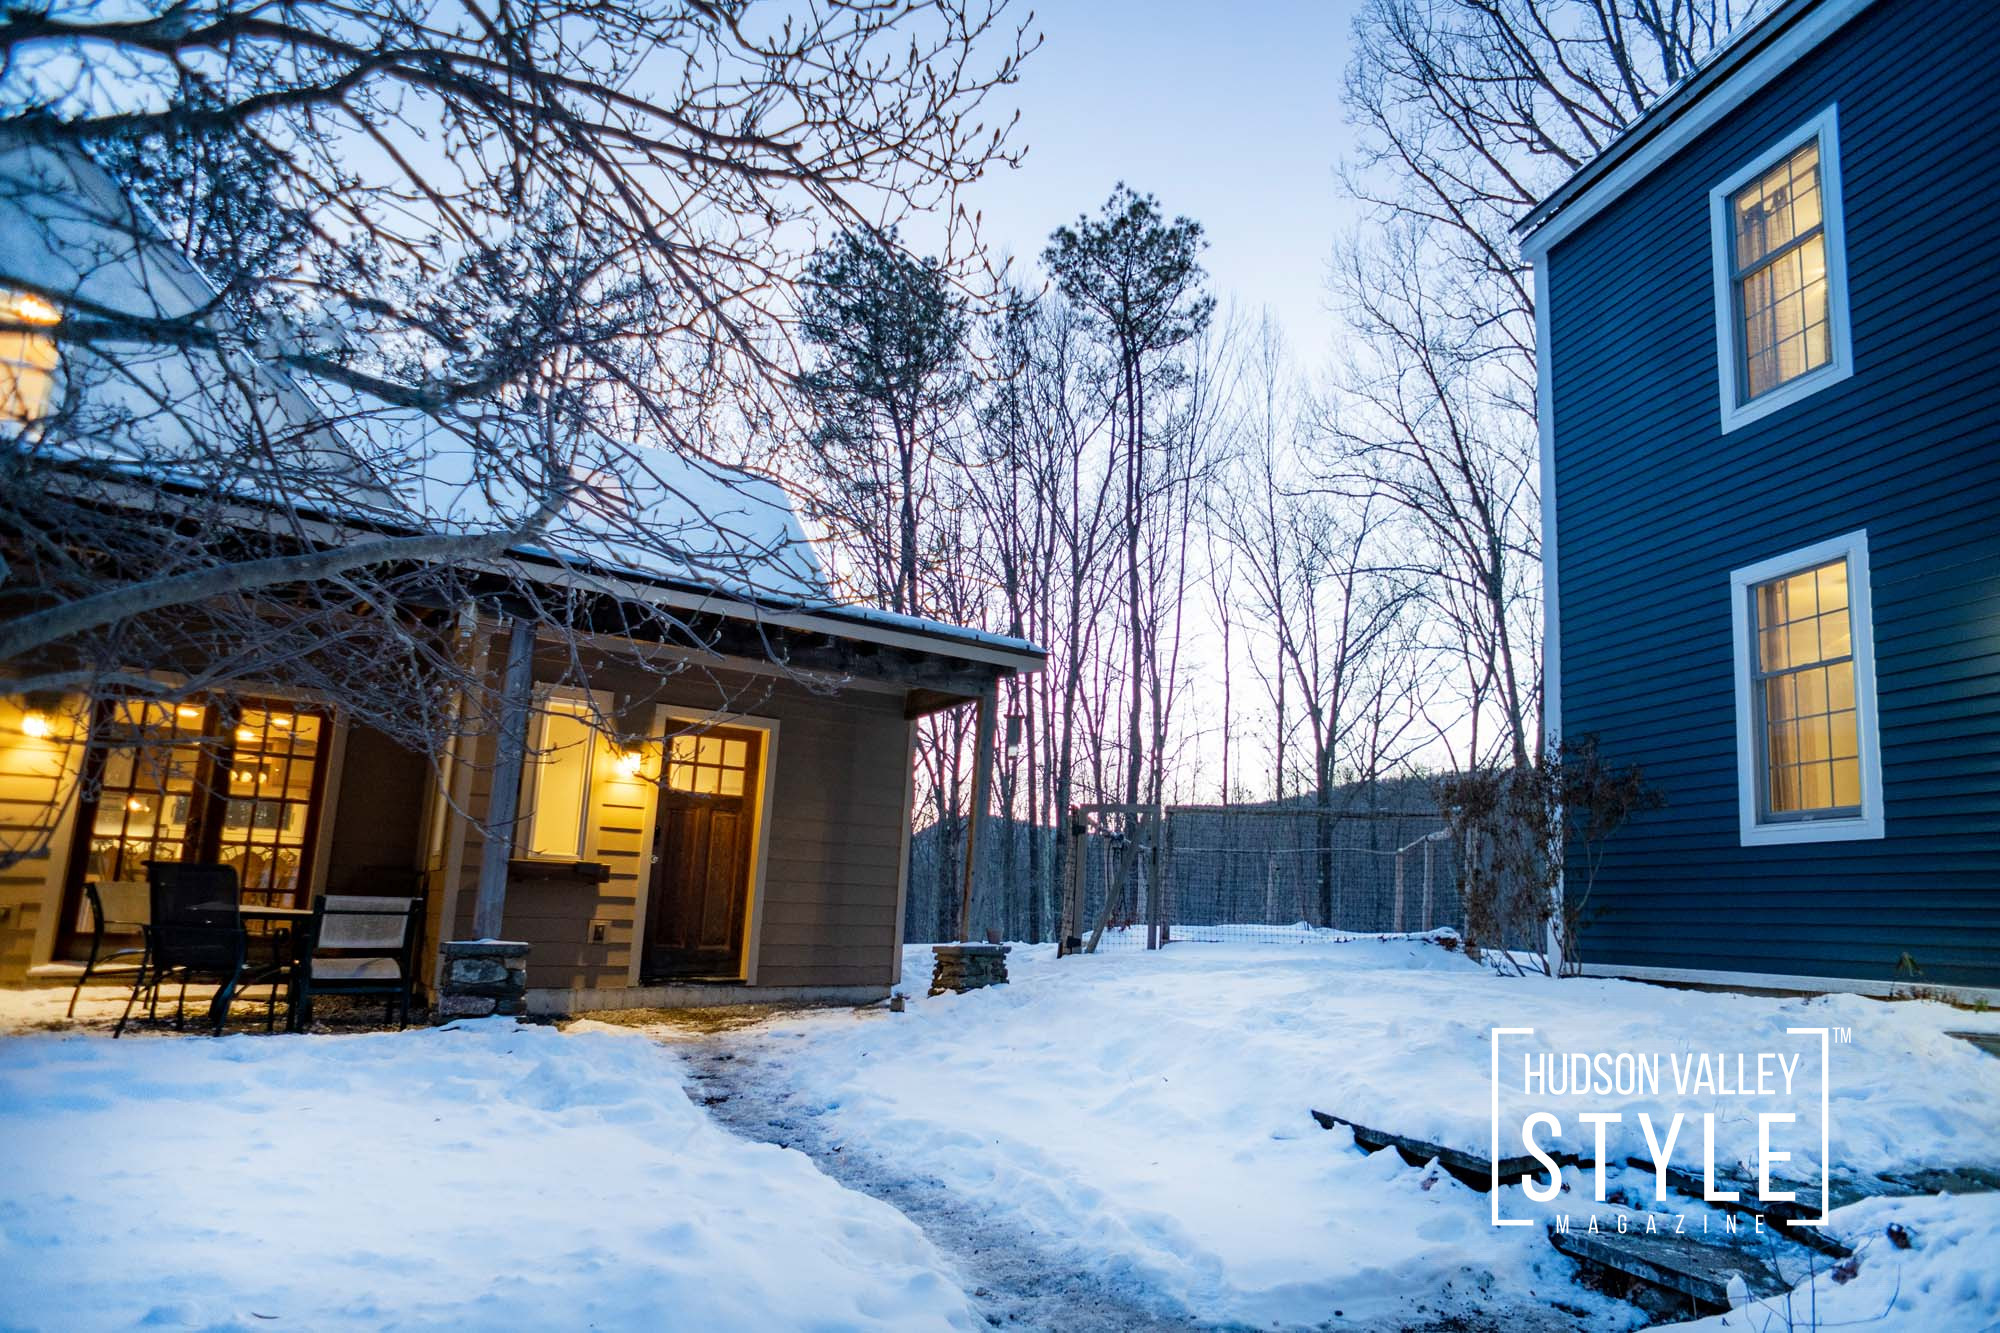 Check out the remote farmhouse and rustic cabin in the Shawangunk Mountains - Photograph by Photographer Maxwell Alexander/Alluvion Media